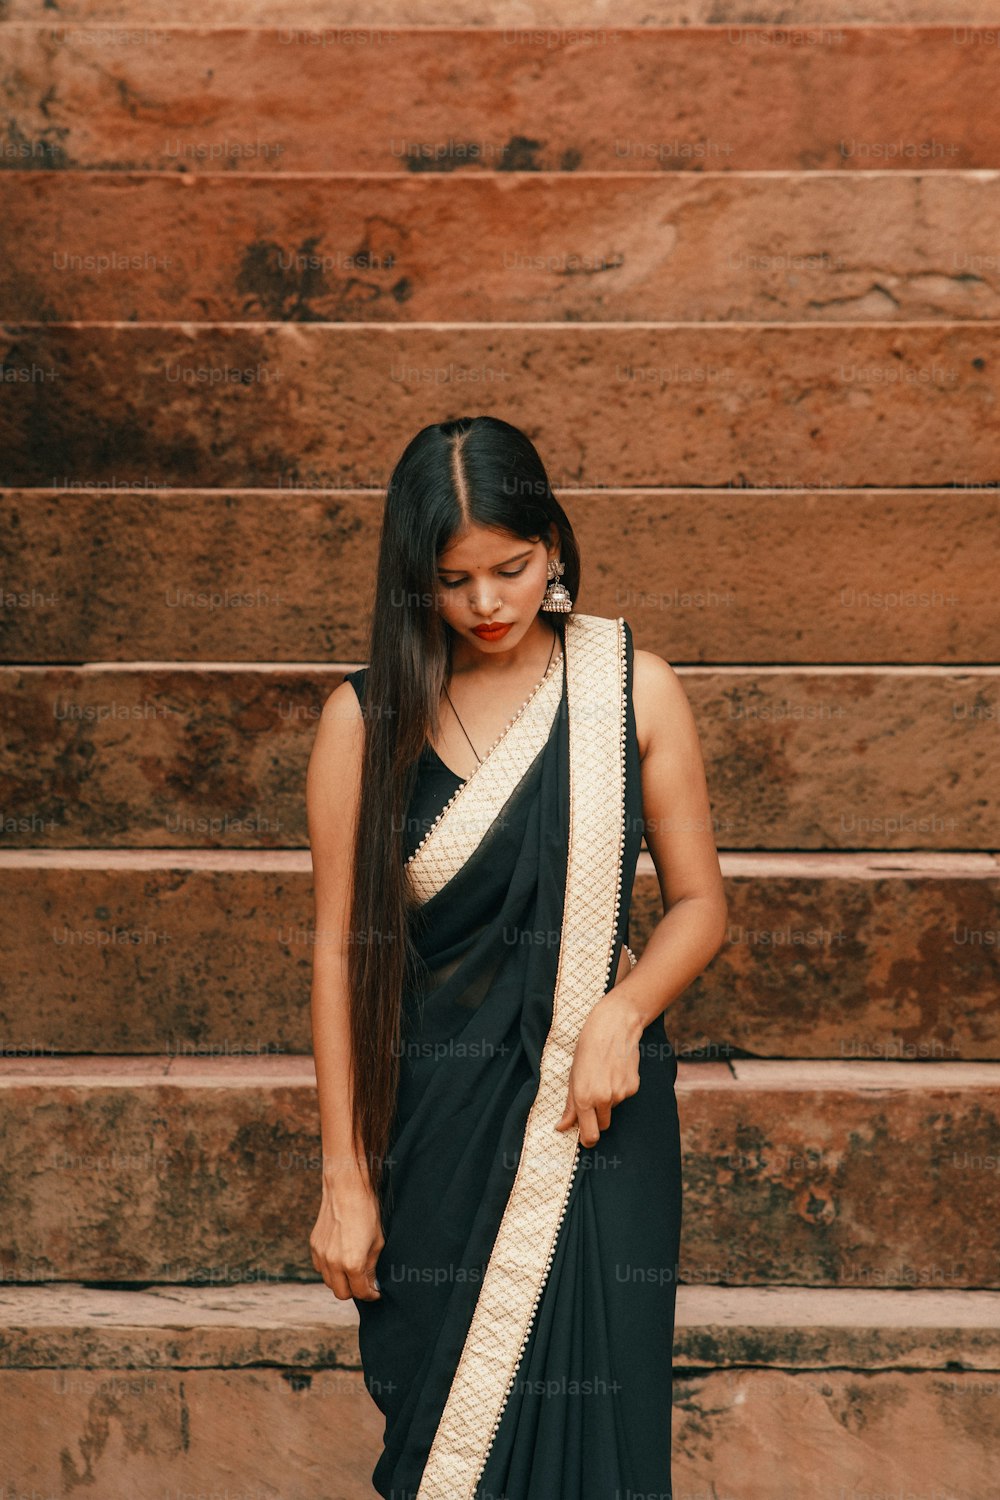 a woman in a black and white sari